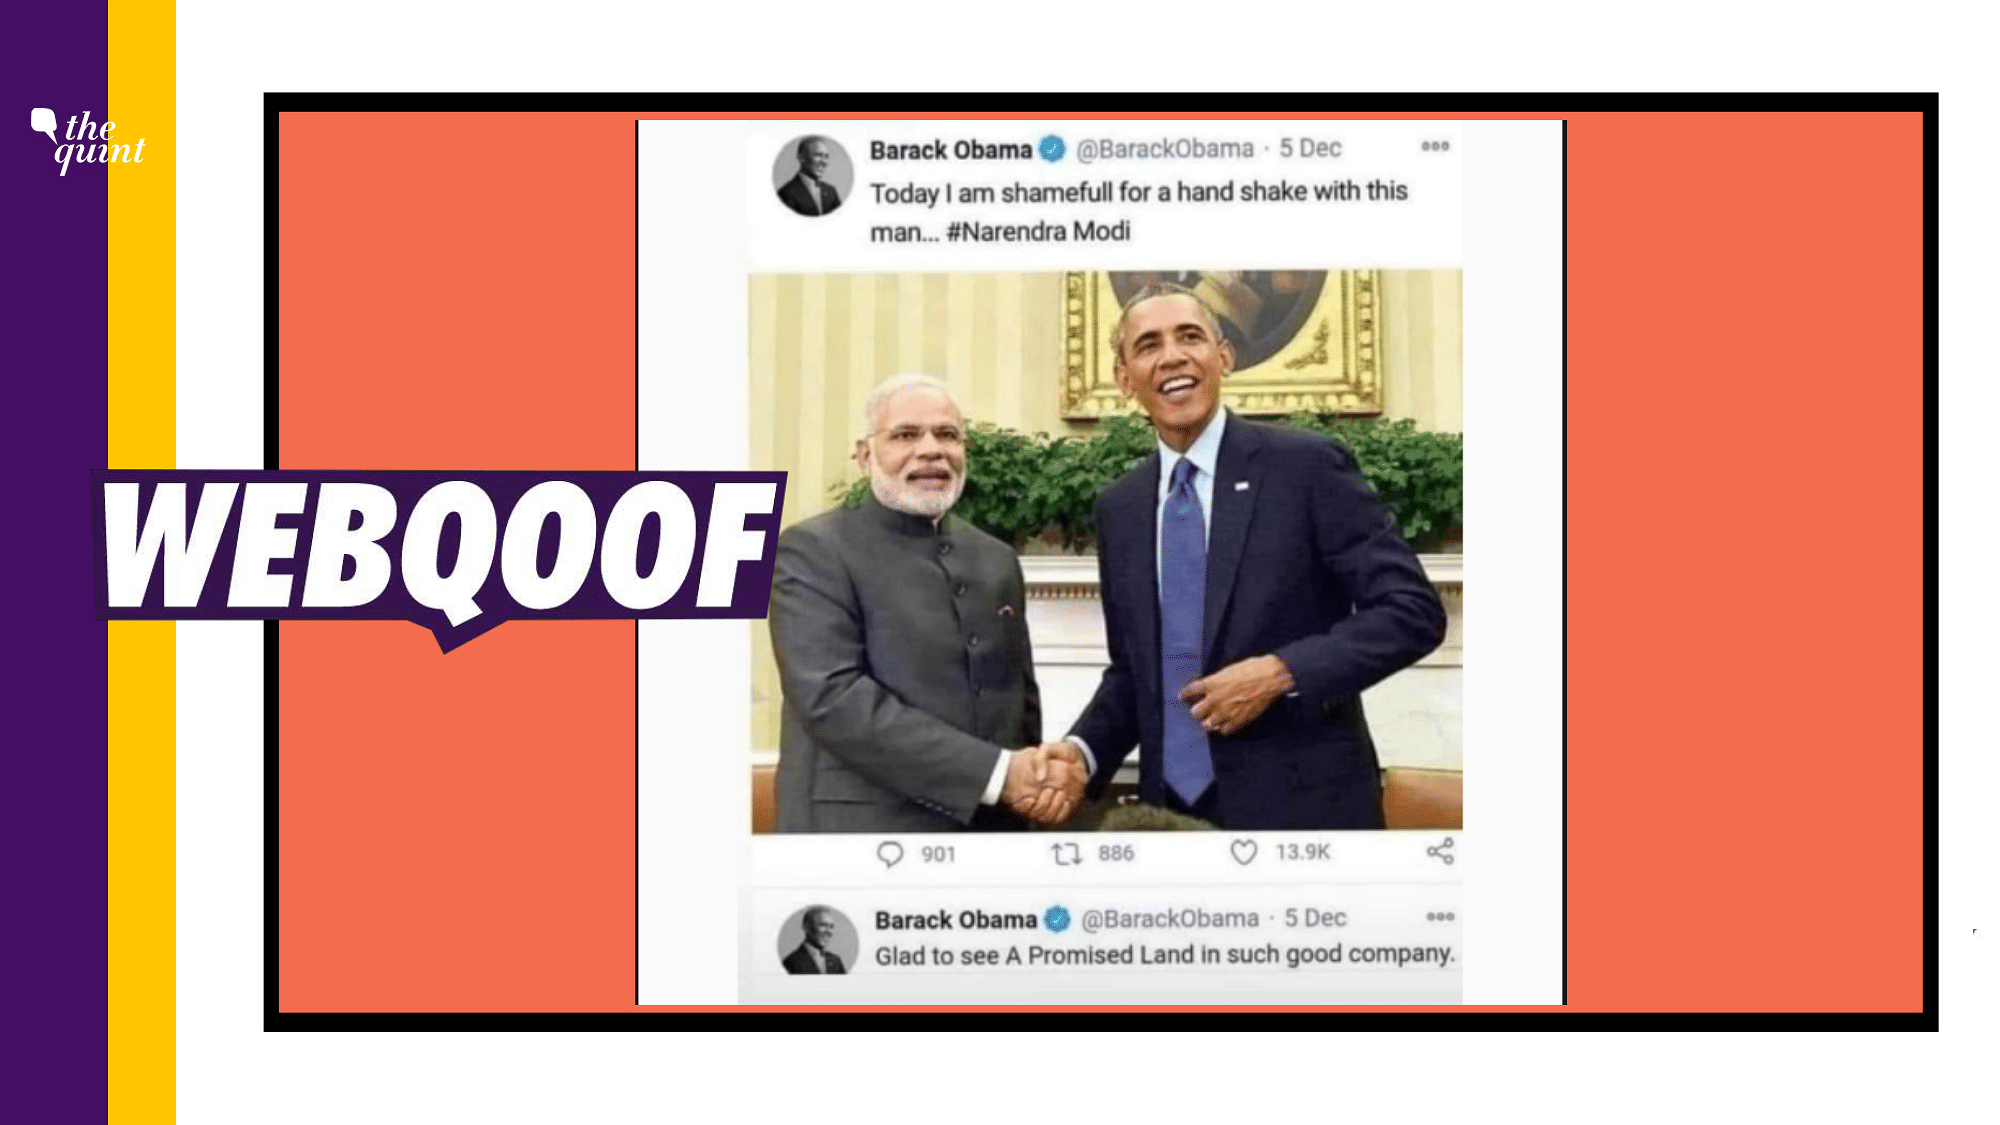 The screenshot containing a morphed tweet of President Obama was widely shared on Facebook and Twitter.